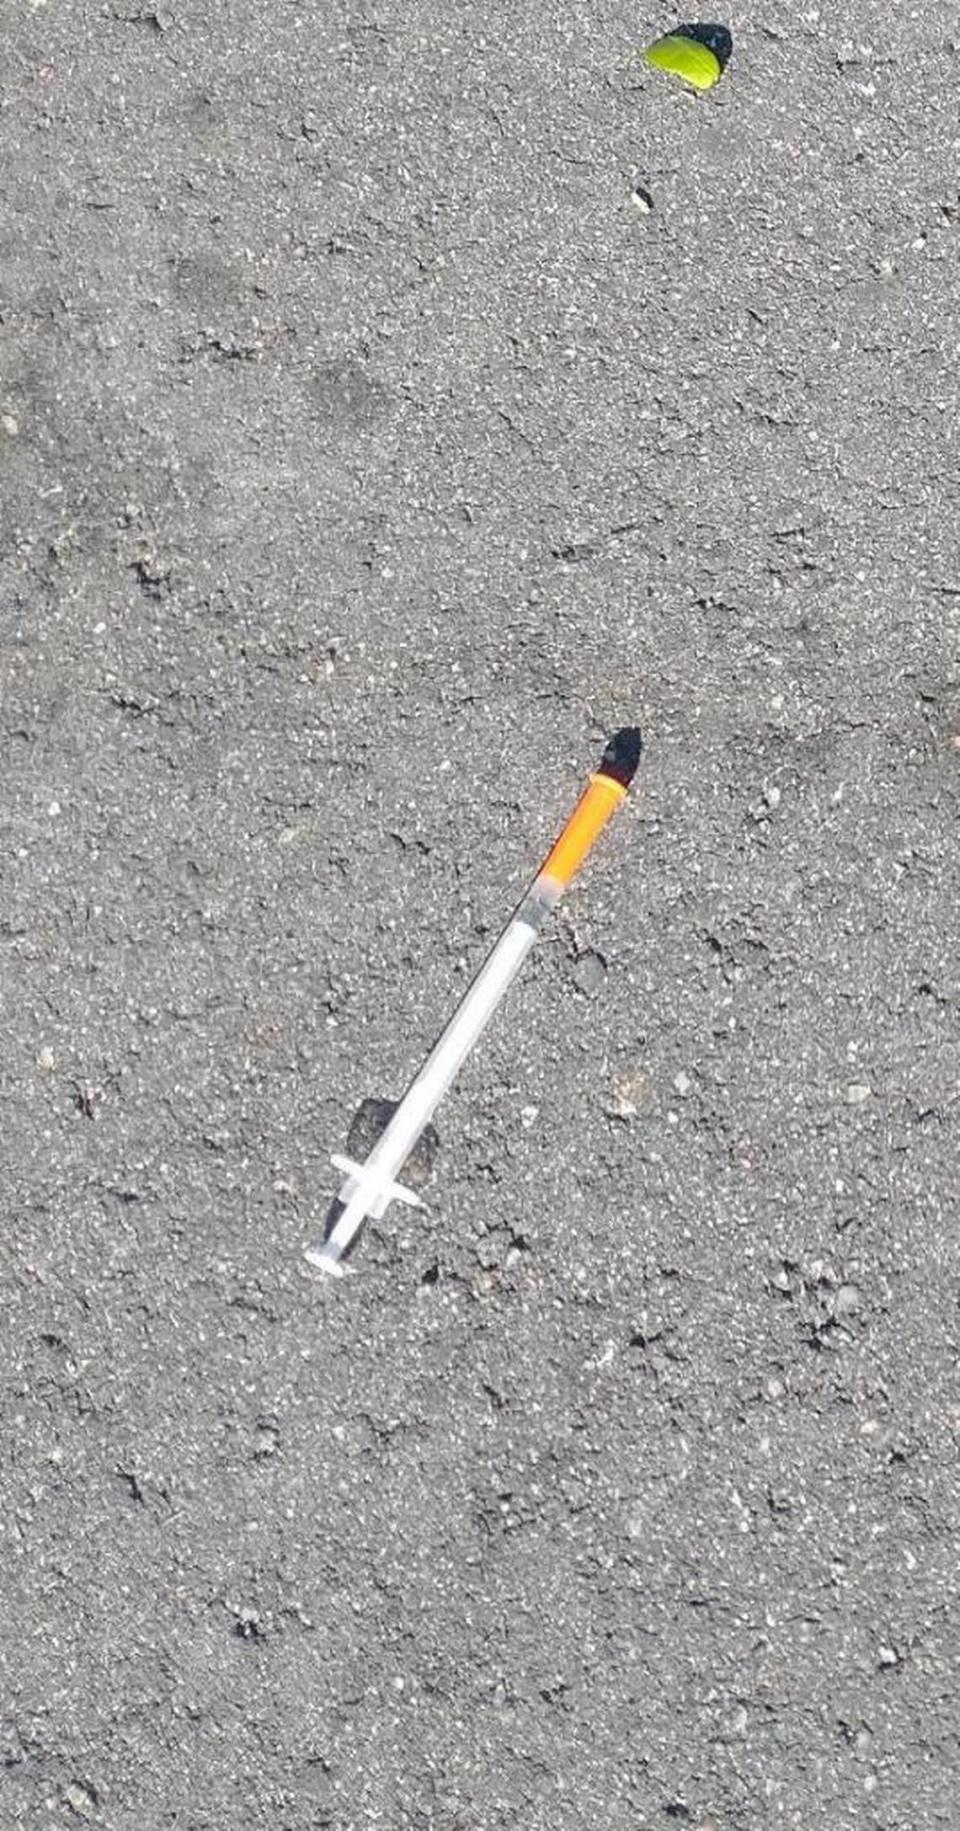 An empty syringe neighbor Jim Henry found on the ground in Ramsey Acres on April 12. He said he was walking his dog around Park Drive and saw it.